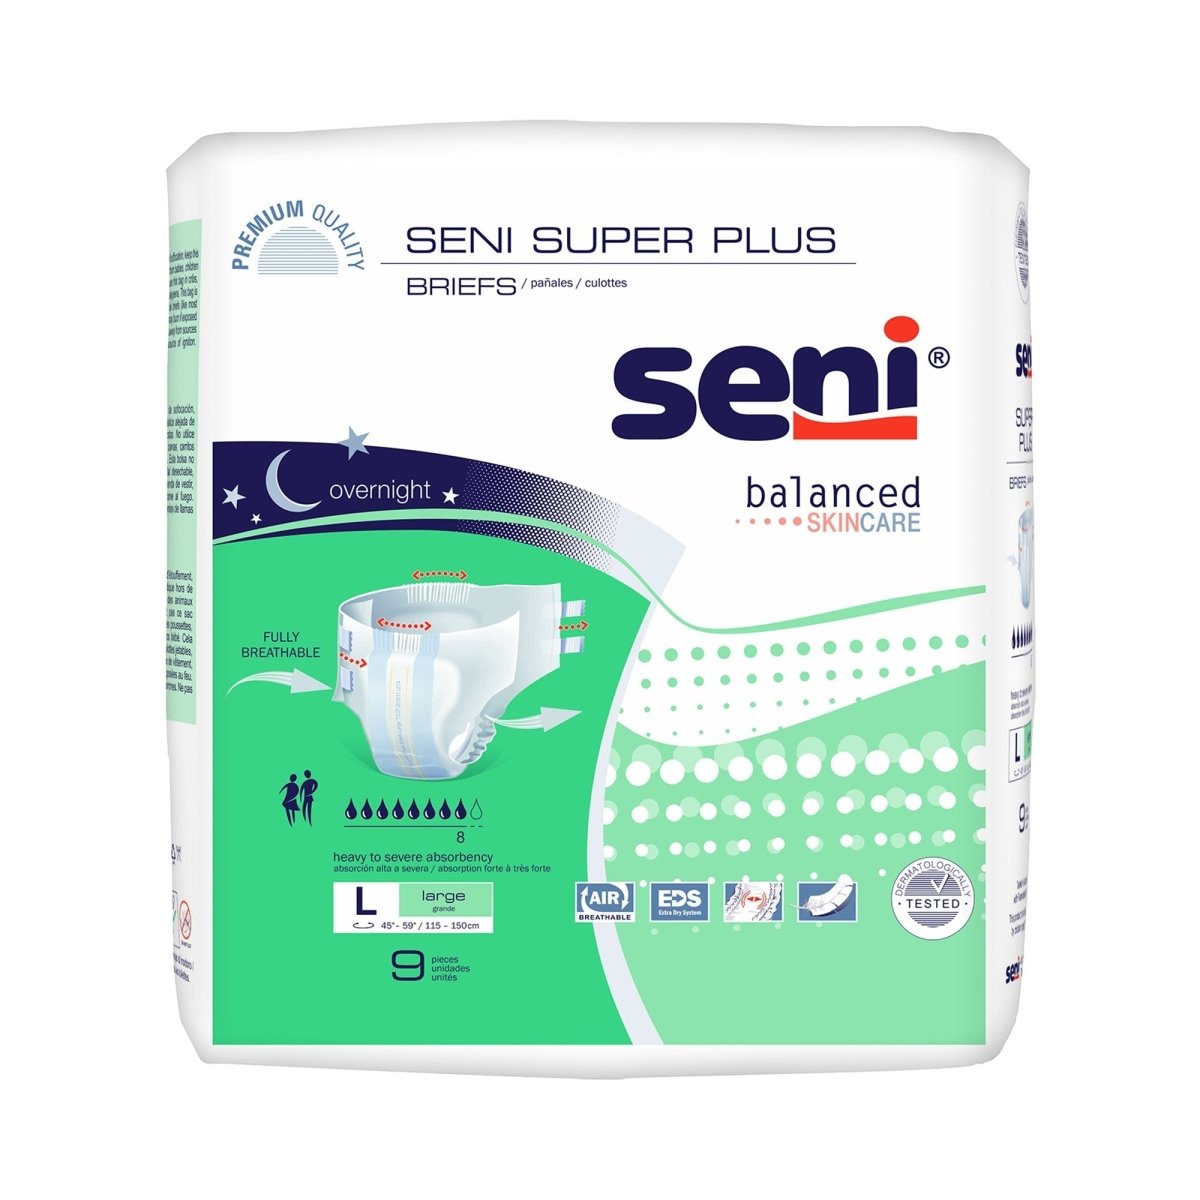 Seni Super Plus Heavy to Severe Absorbency Incontinence Brief -Unisex - 1163824_CS - 1